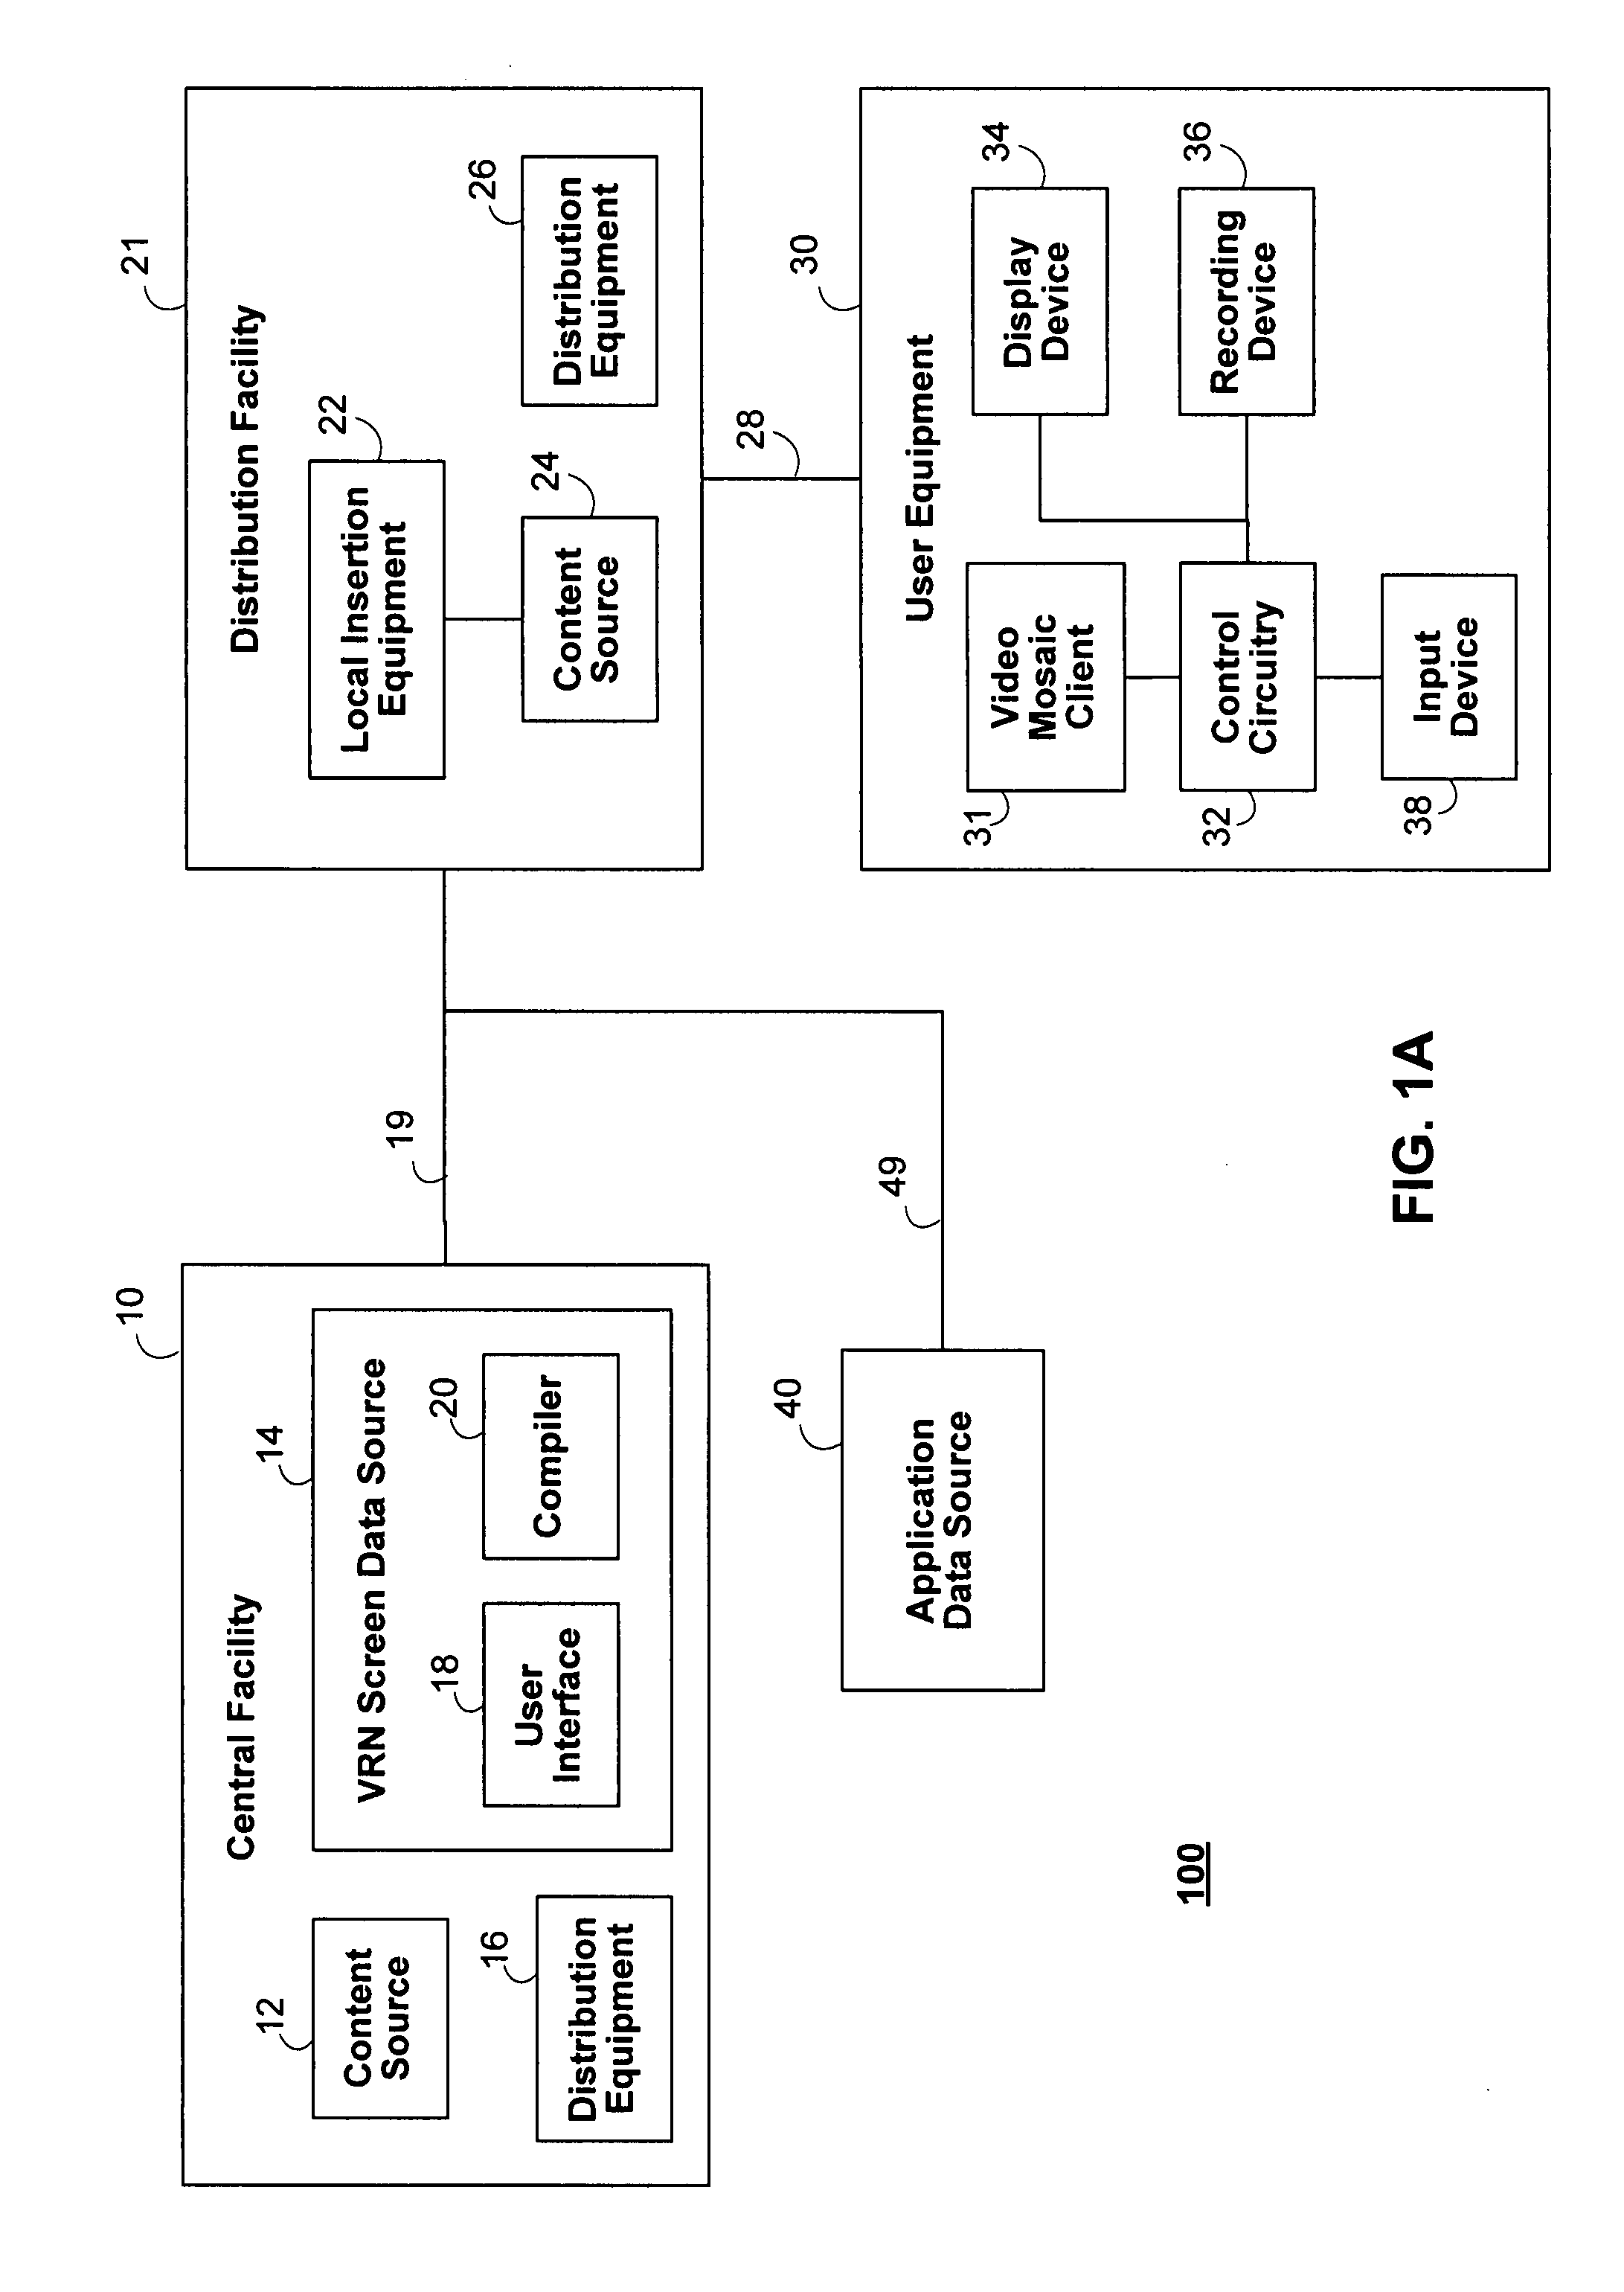 Systems and methods for providing blackout recording and summary information